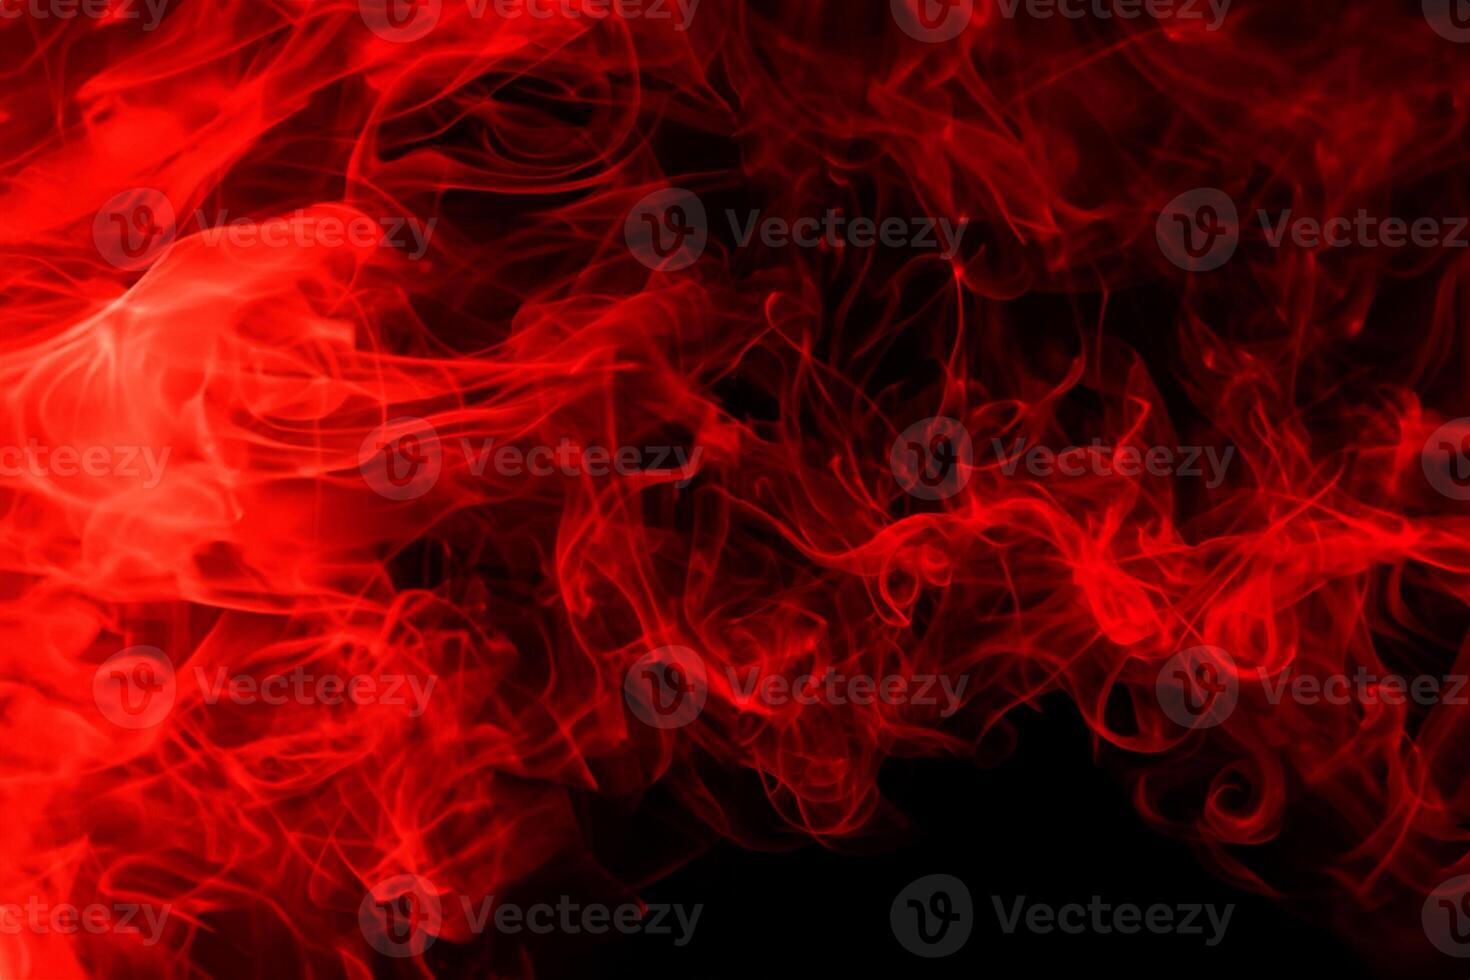 Fluffy Puffs of Smoke and Fog on Black Background, fire design and darkness concept photo